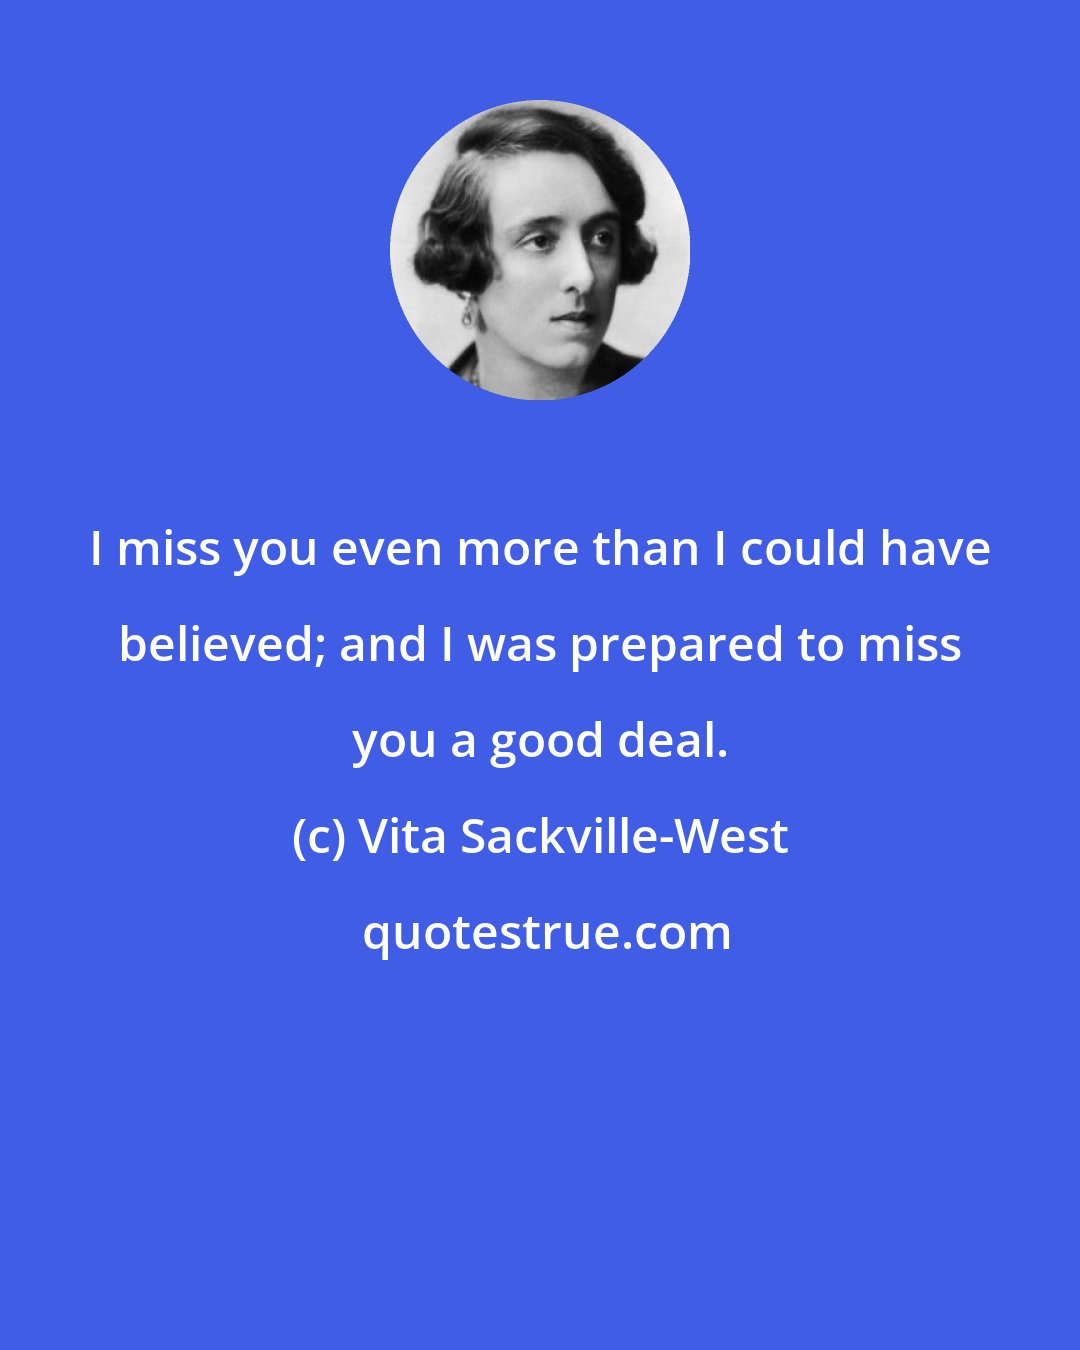 Vita Sackville-West: I miss you even more than I could have believed; and I was prepared to miss you a good deal.